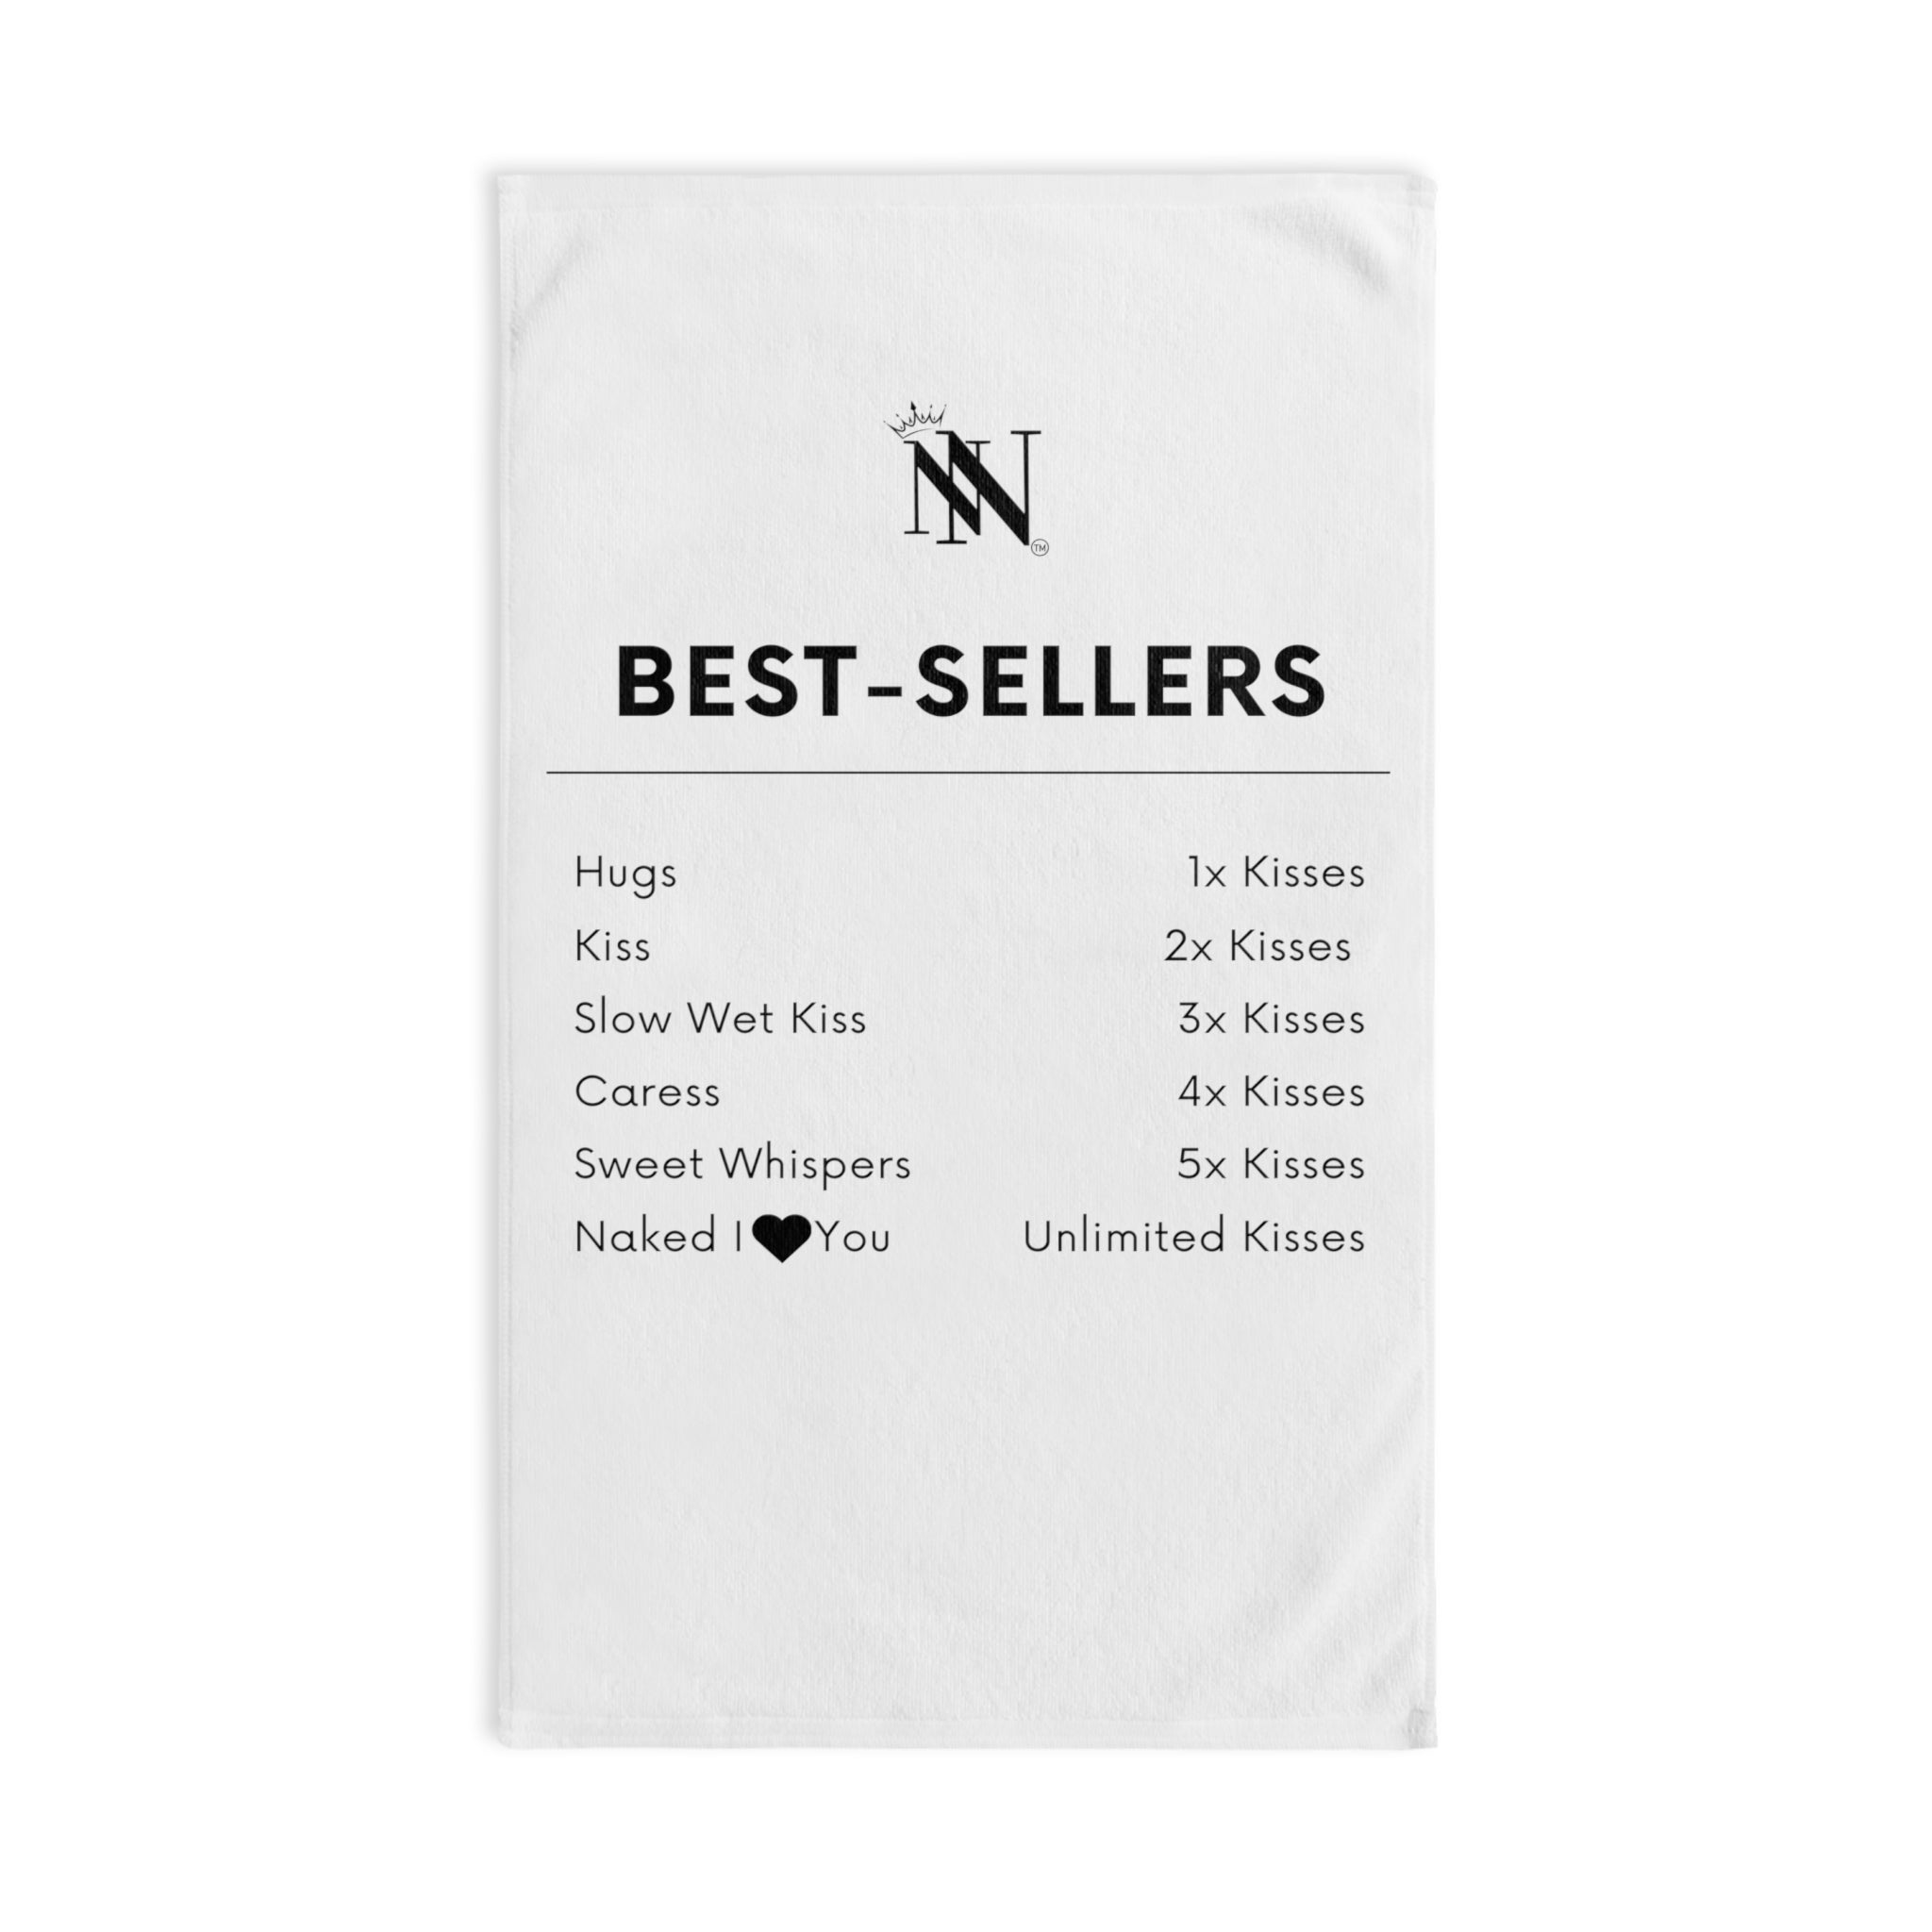 Best Sellers White | Funny Gifts for Men - Gifts for Him - Birthday Gifts for Men, Him, Her, Husband, Boyfriend, Girlfriend, New Couple Gifts, Fathers & Valentines Day Gifts, Christmas Gifts NECTAR NAPKINS